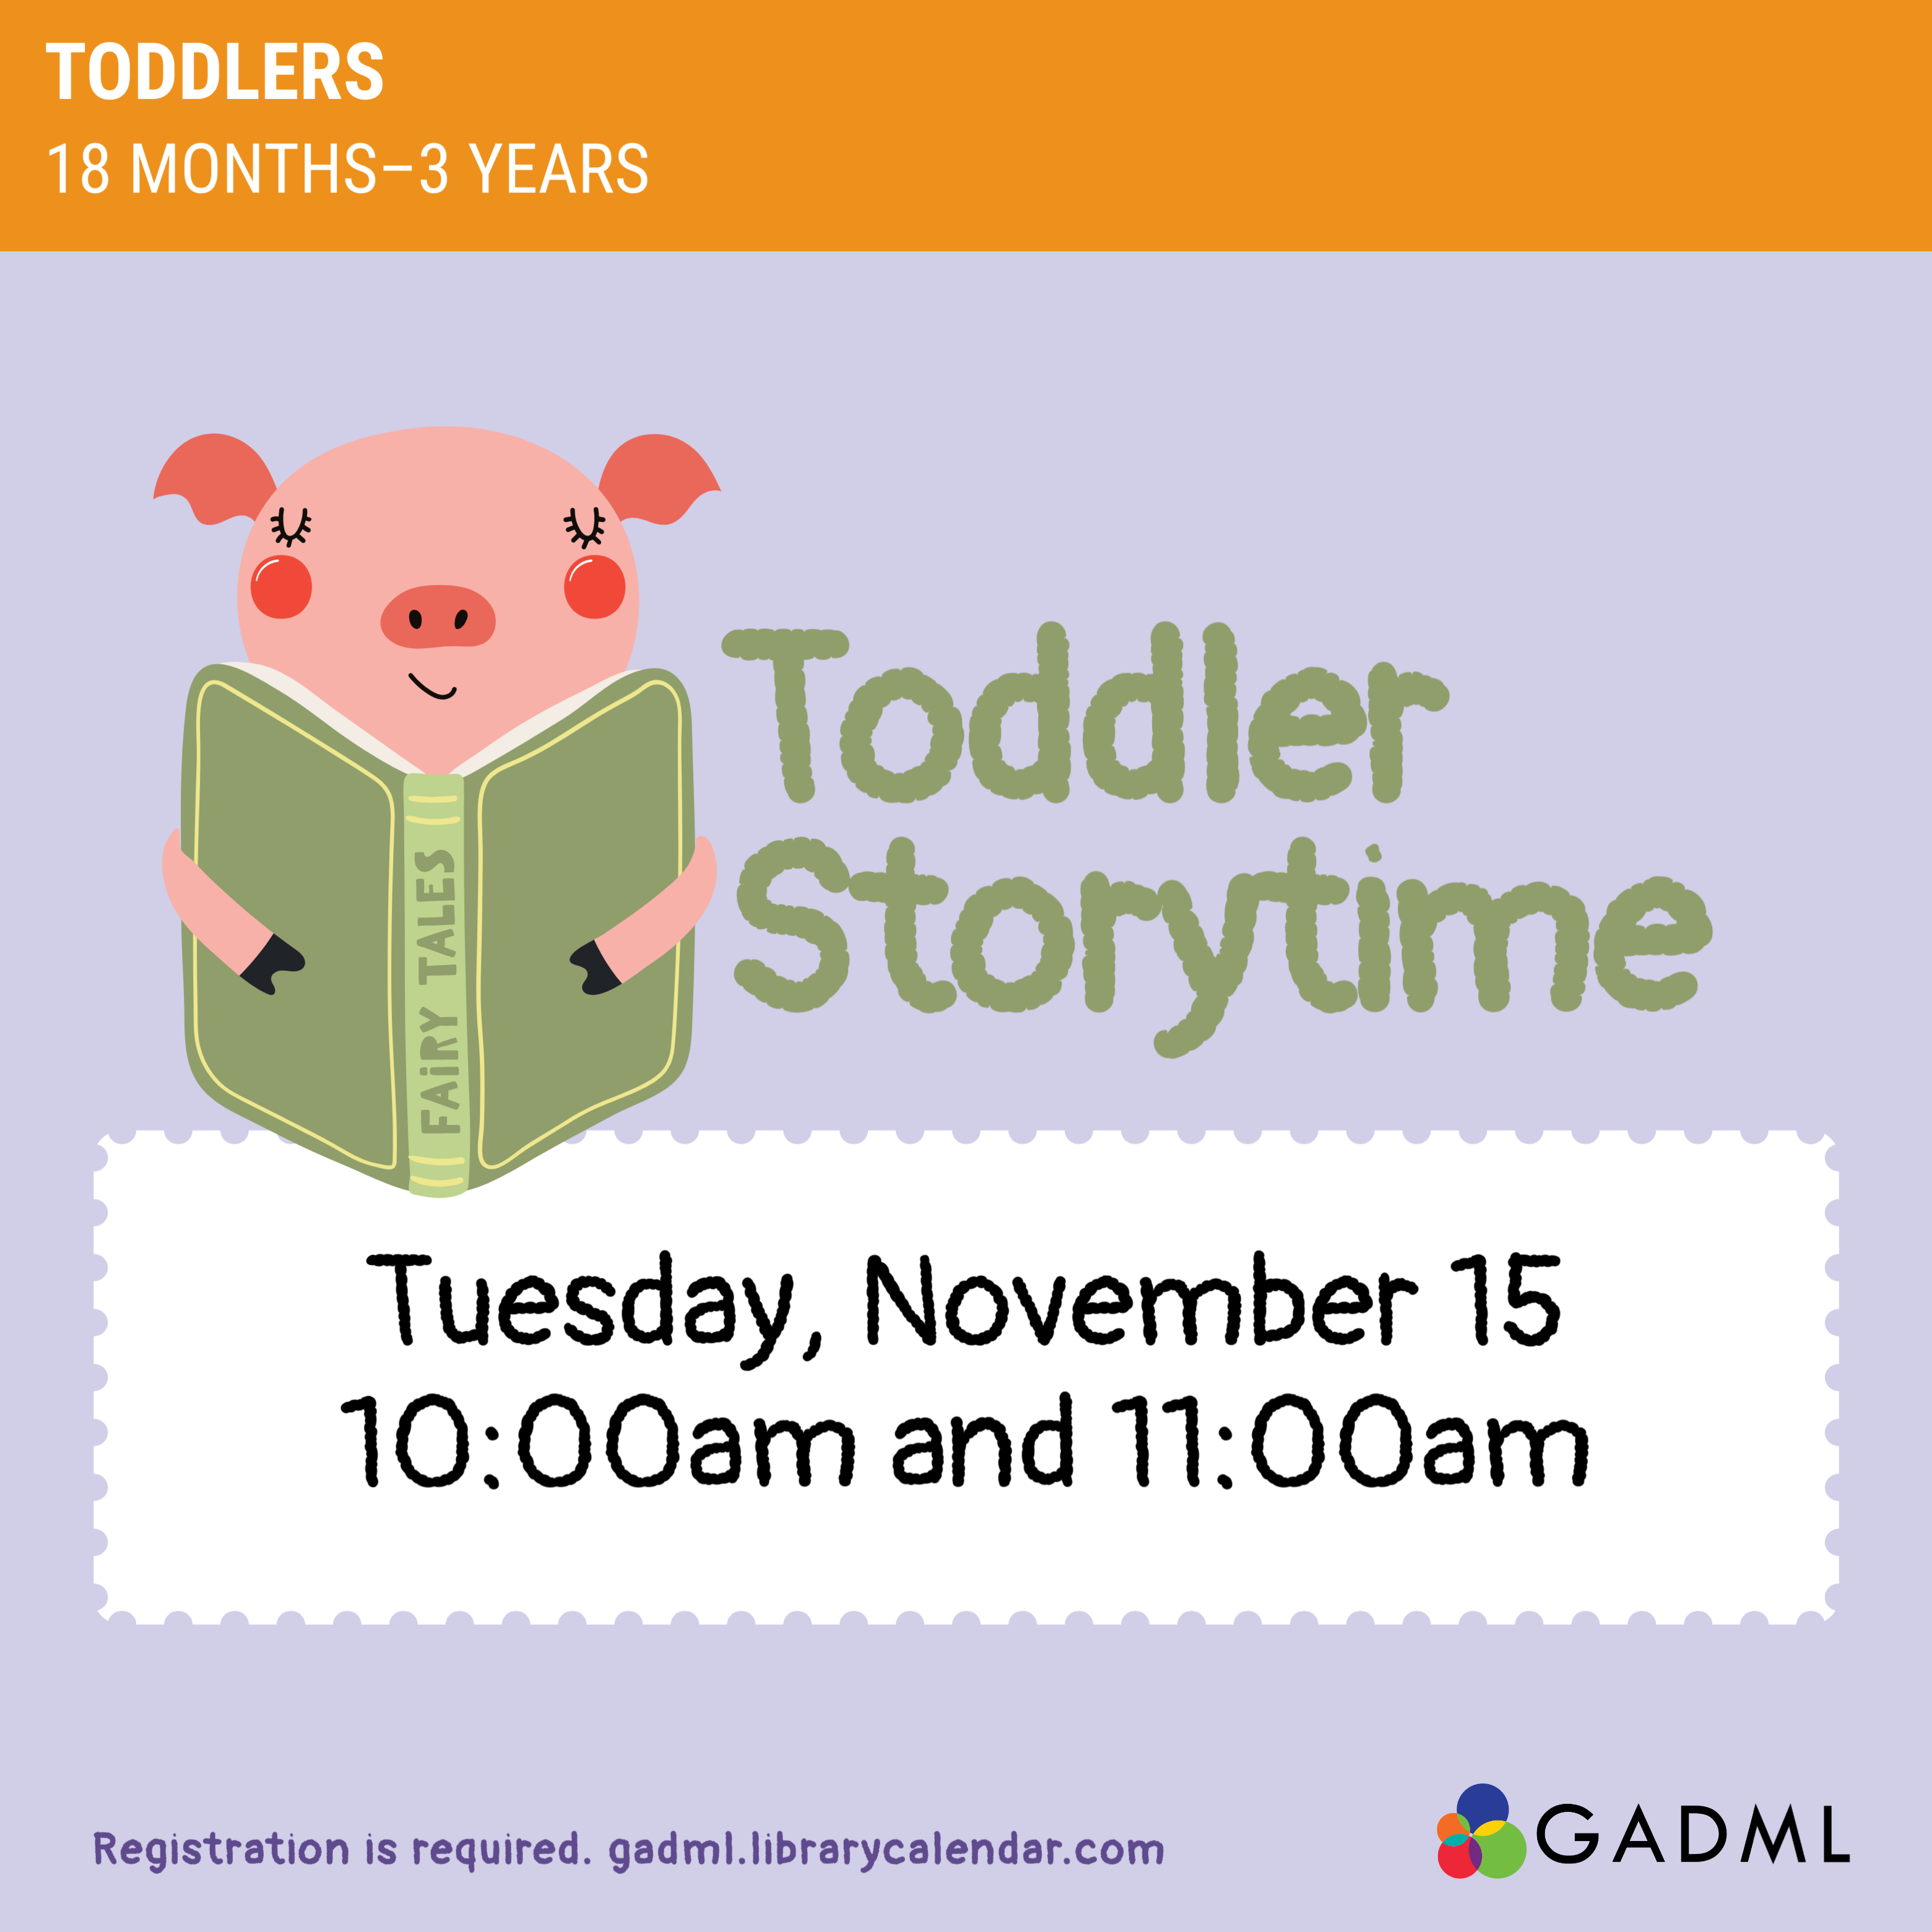 Toddler Storytime is on November 15 at 10 and 11am, our theme is Getting Dressed